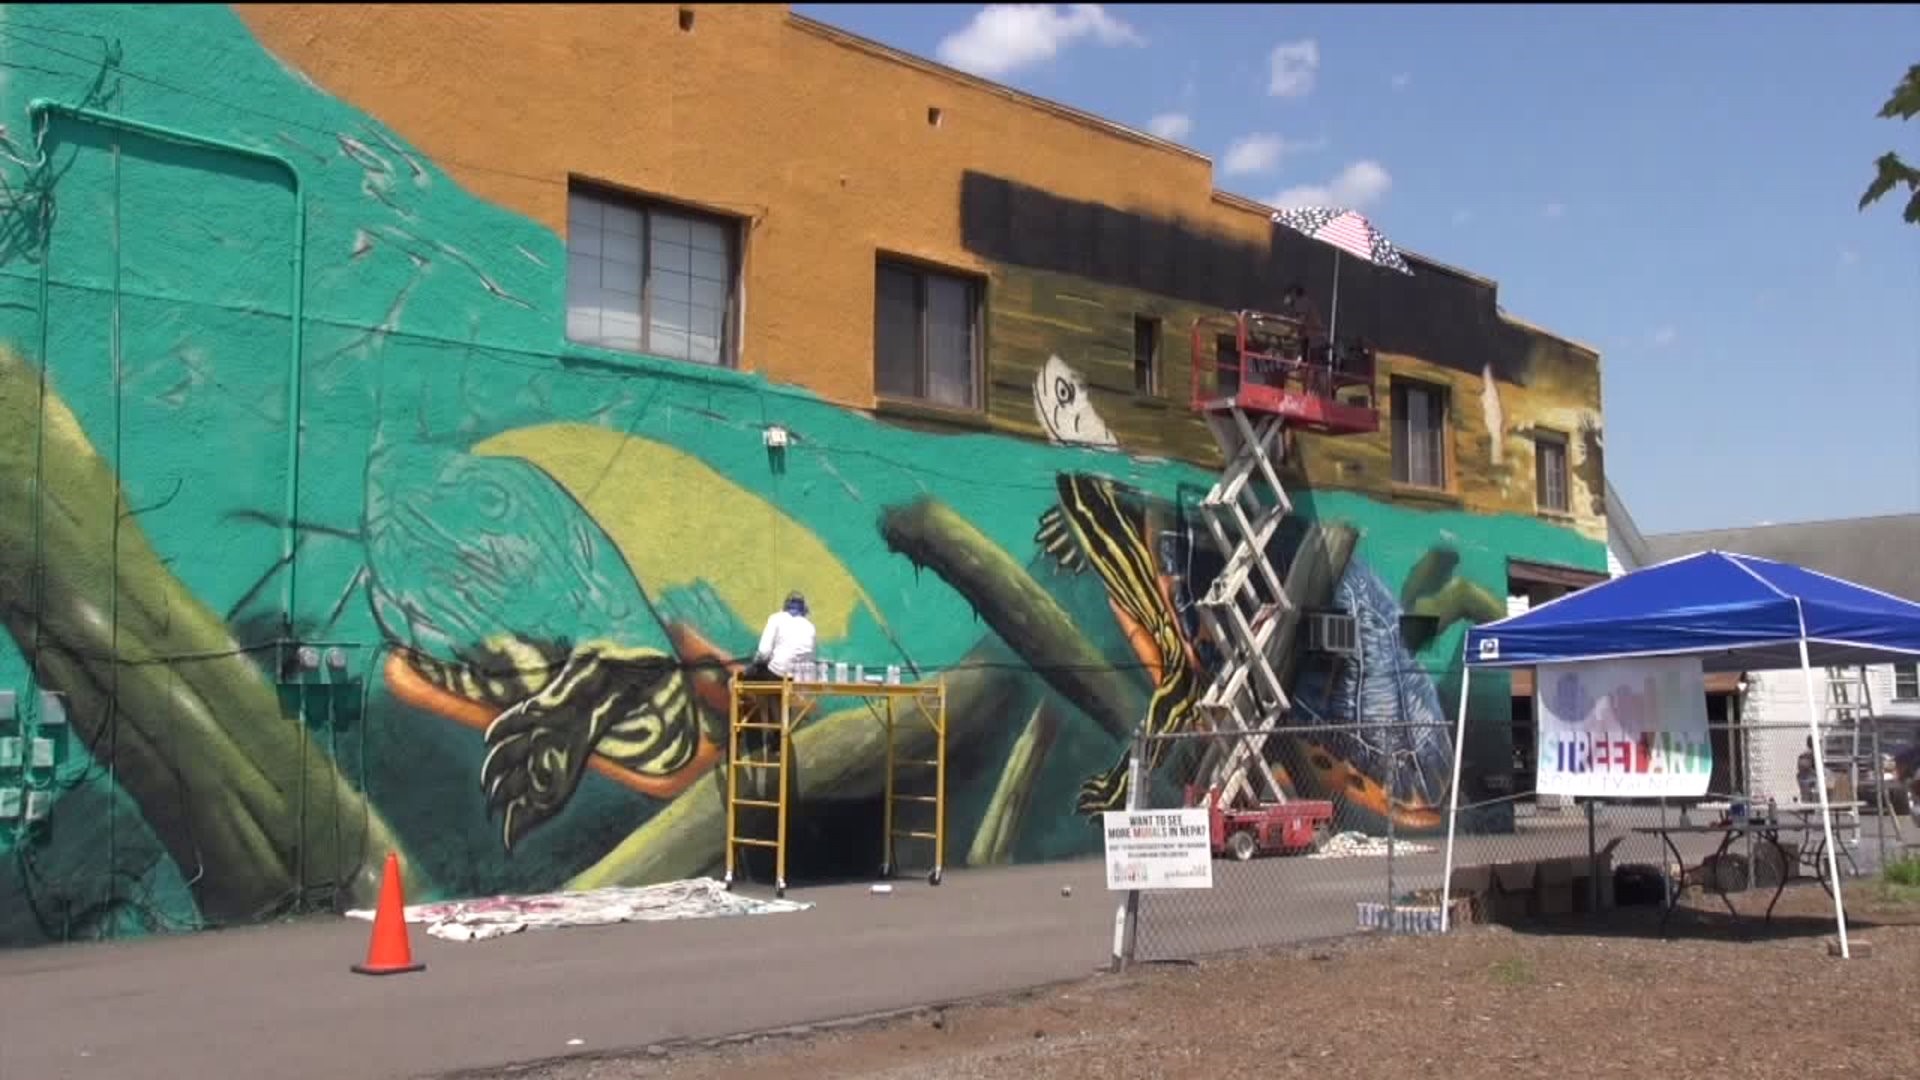 Artists Transform Buildings in Luzerne County